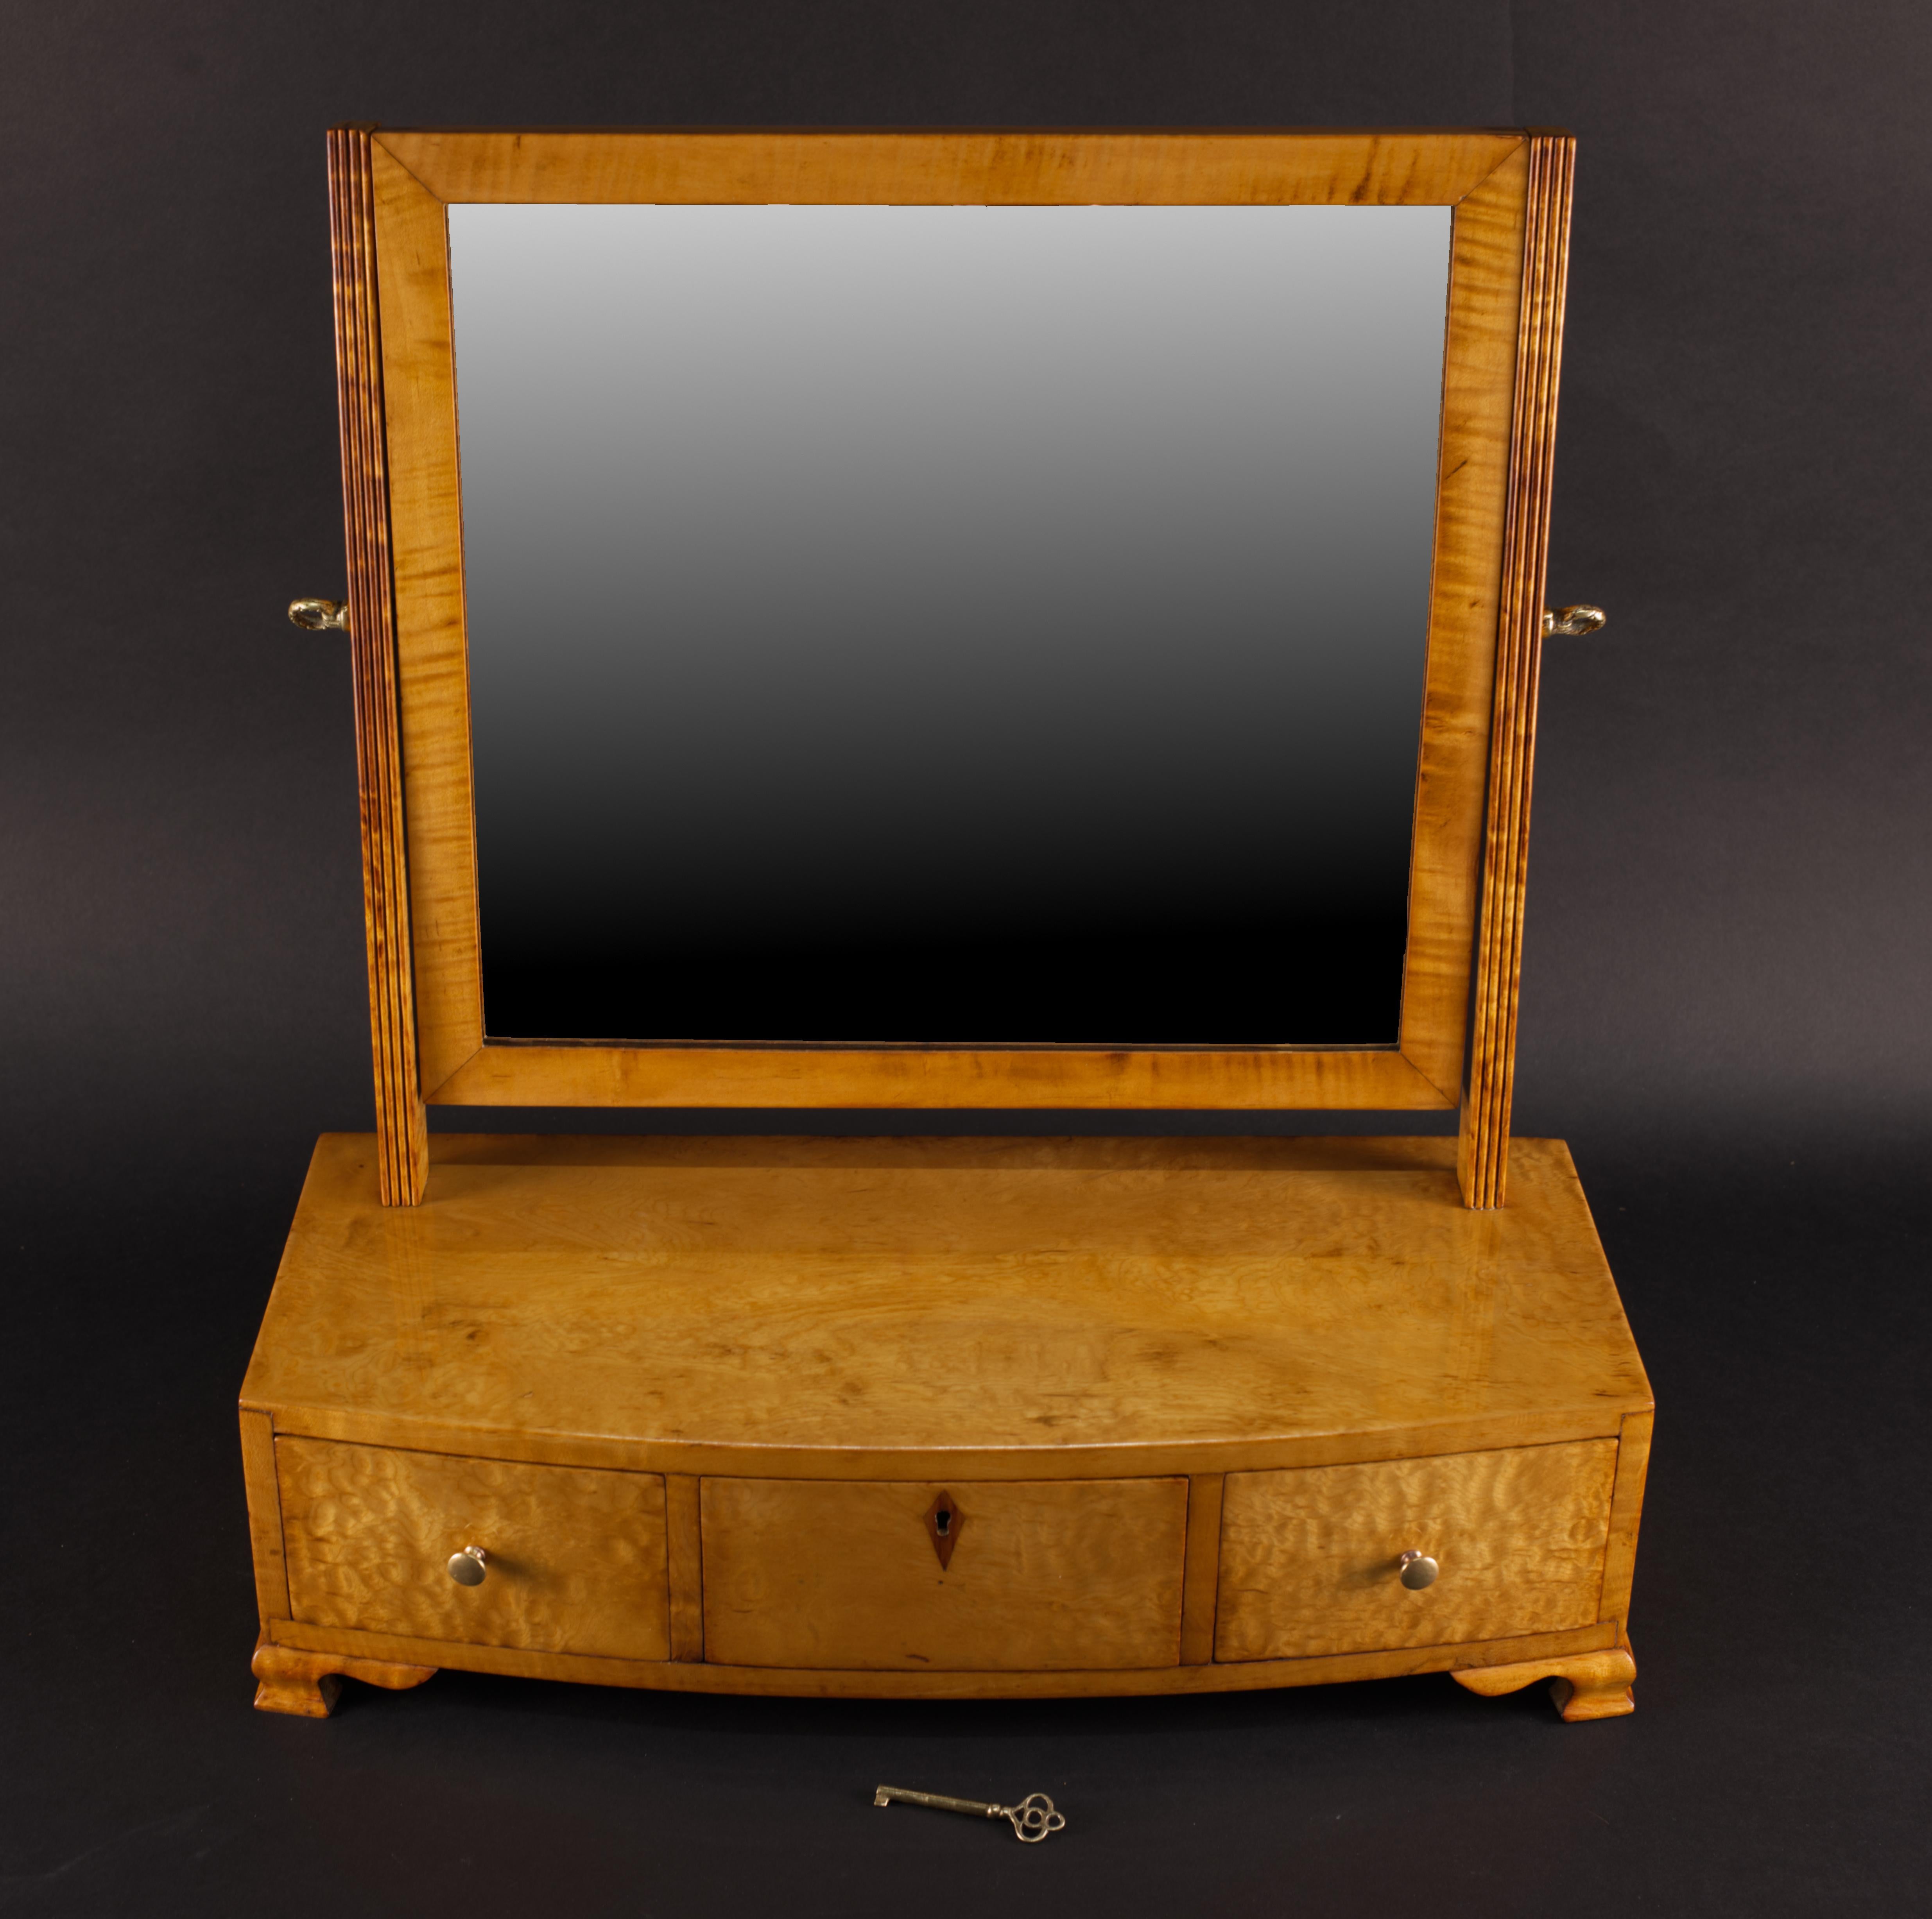 This is a lovely dressing table mirror from early 1800. It is made in highly figured American maple veneer and solids. Parts of the frame are American spruce. 
Because of the unique graining of the wood, French Polished shellac was chosen as a most